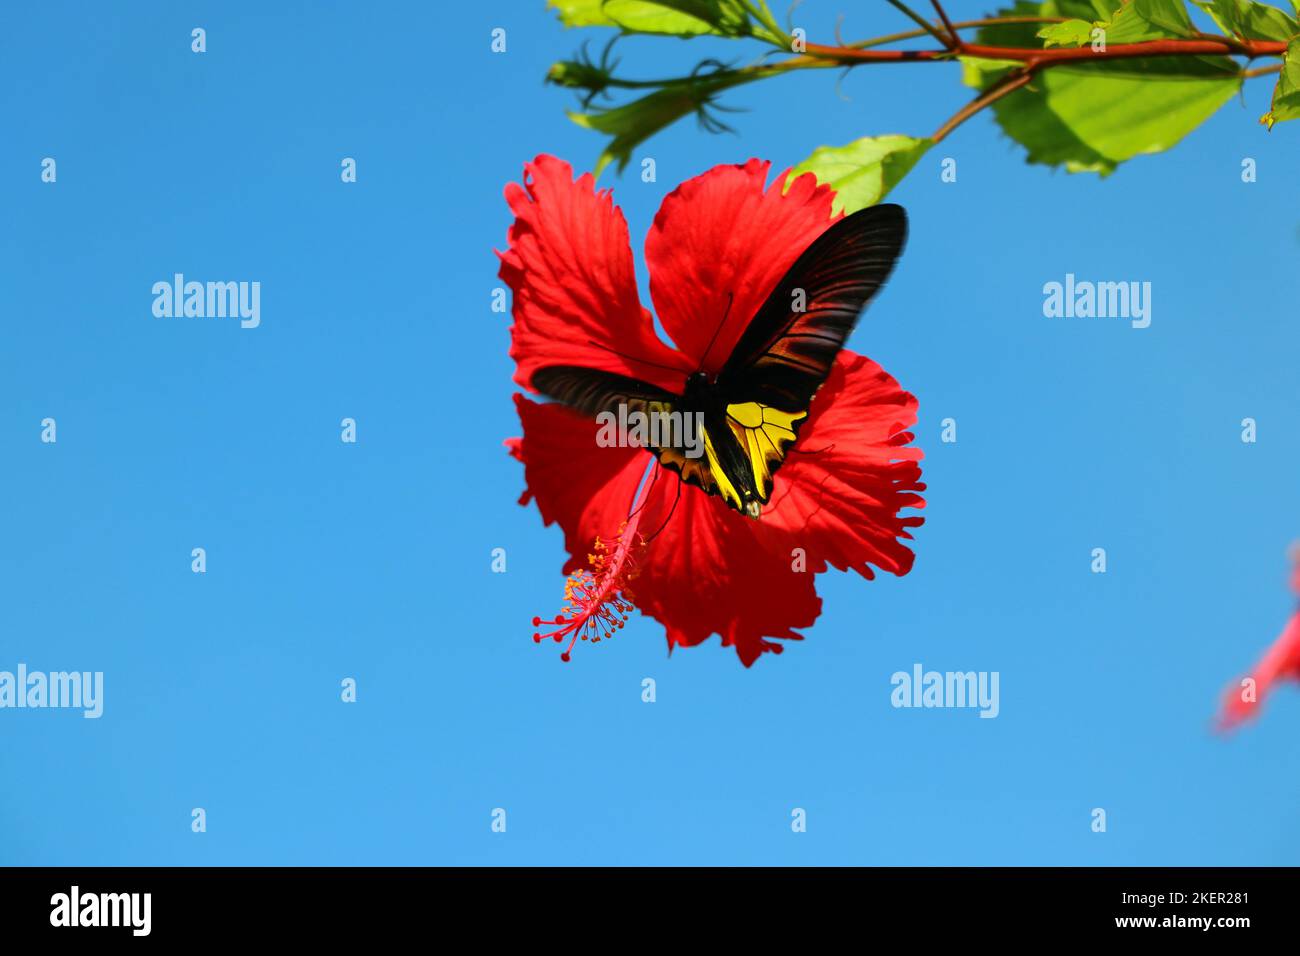 Goden birdwing butterfly swarm red chinese hibiscus Stock Photo